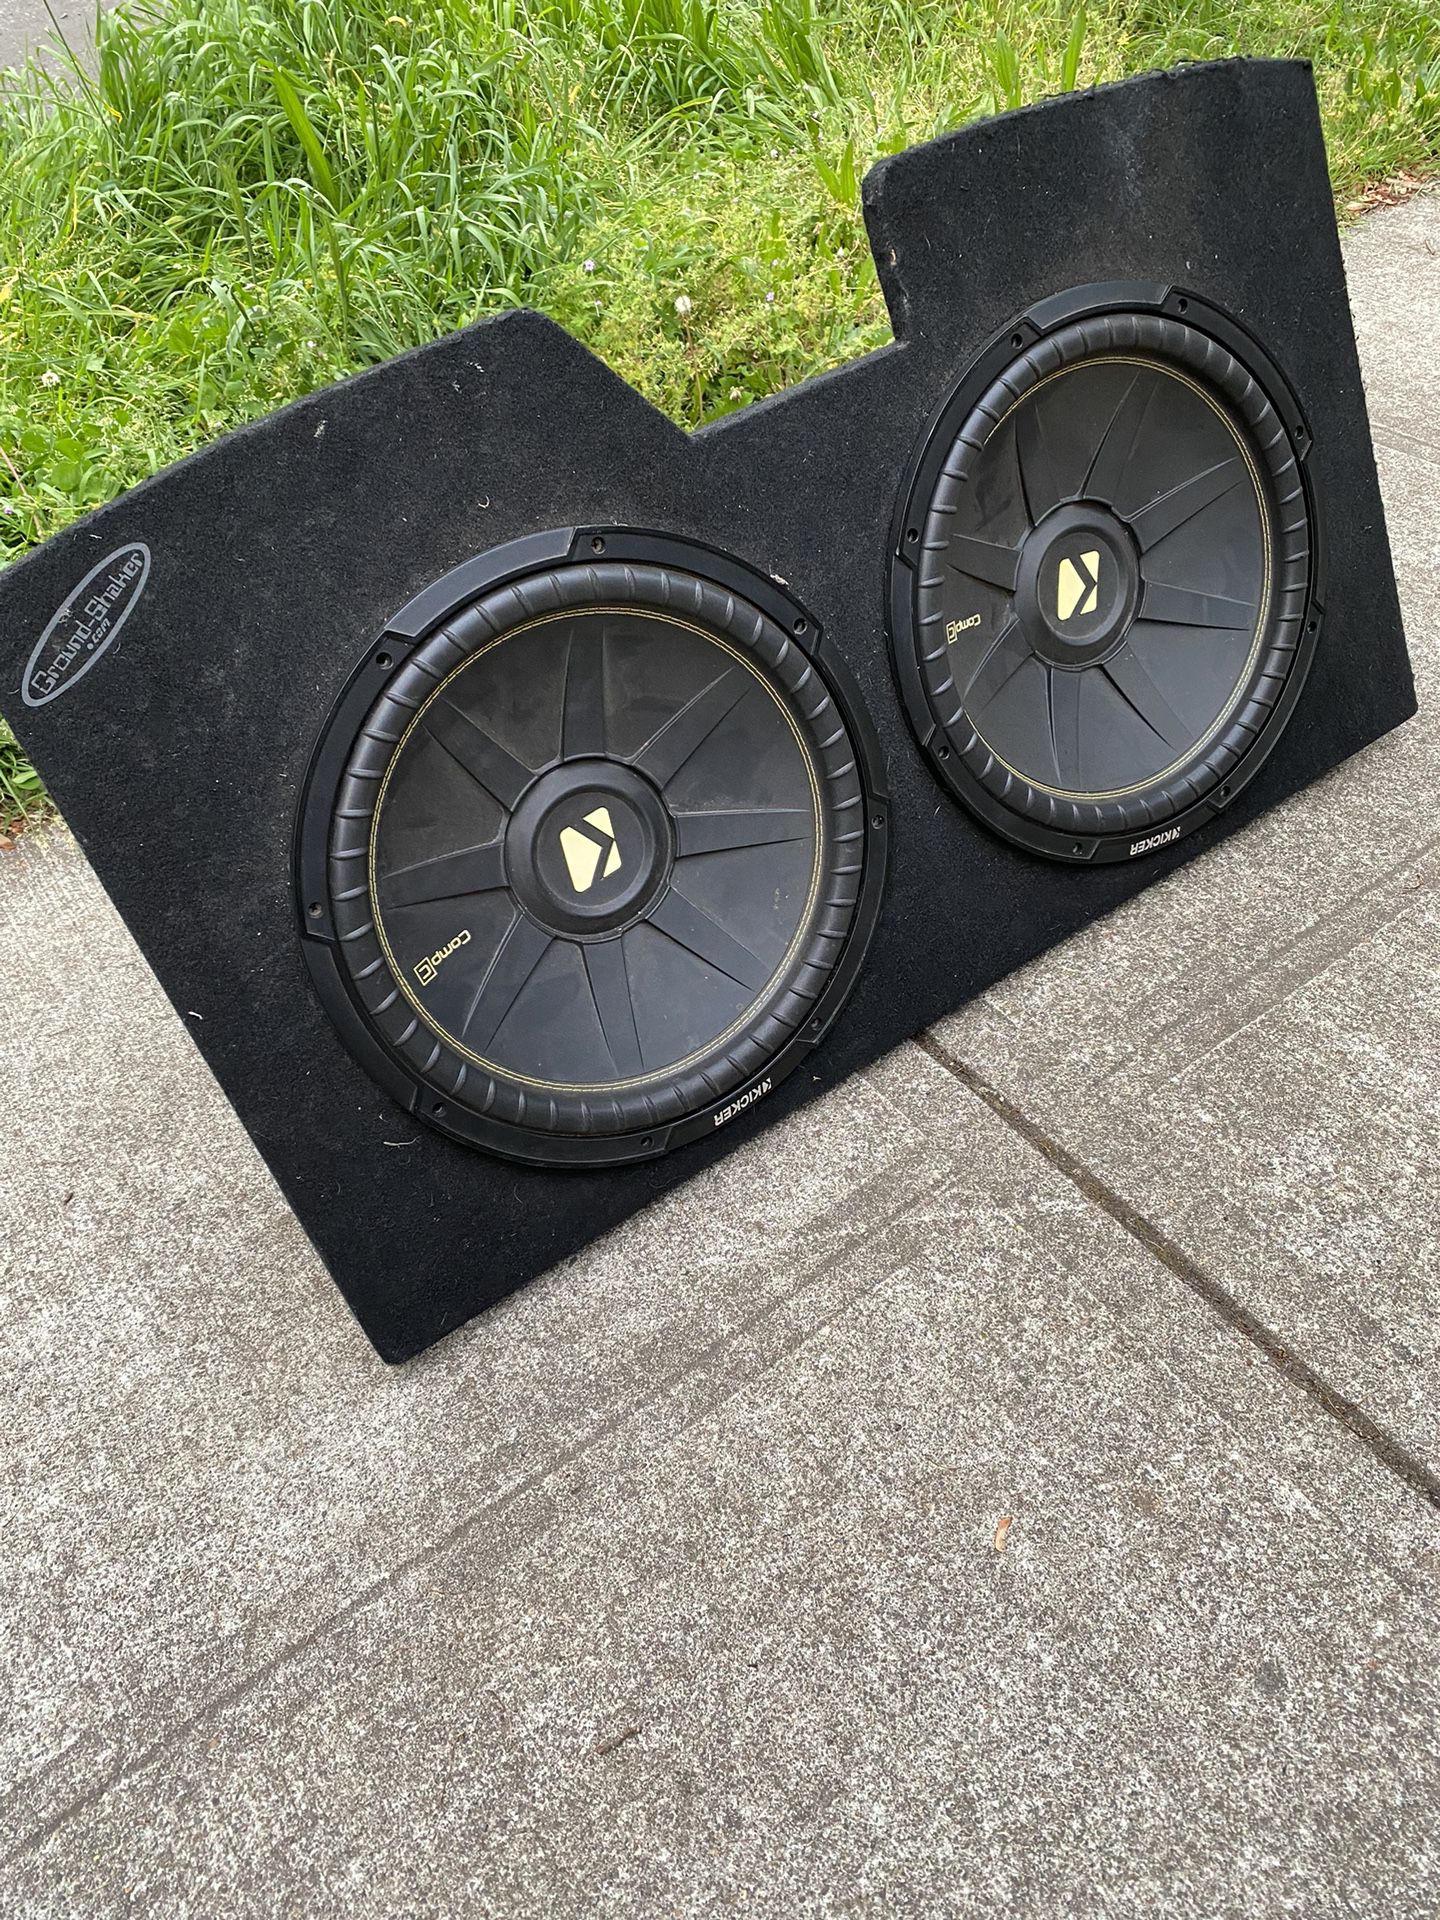 2 15inch Kicker Comps And 1200w Amp And Stereo